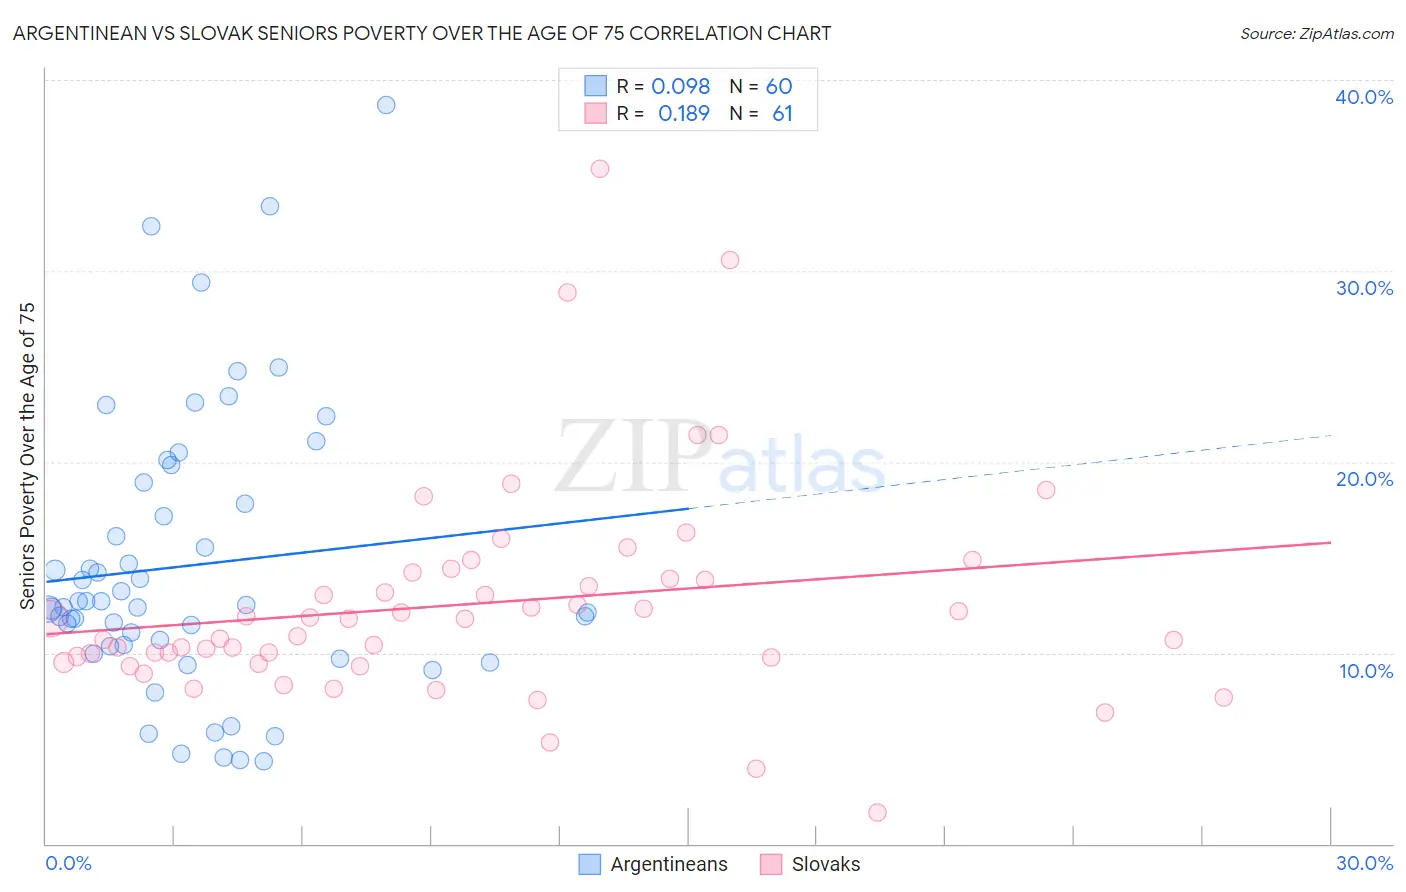 Argentinean vs Slovak Seniors Poverty Over the Age of 75